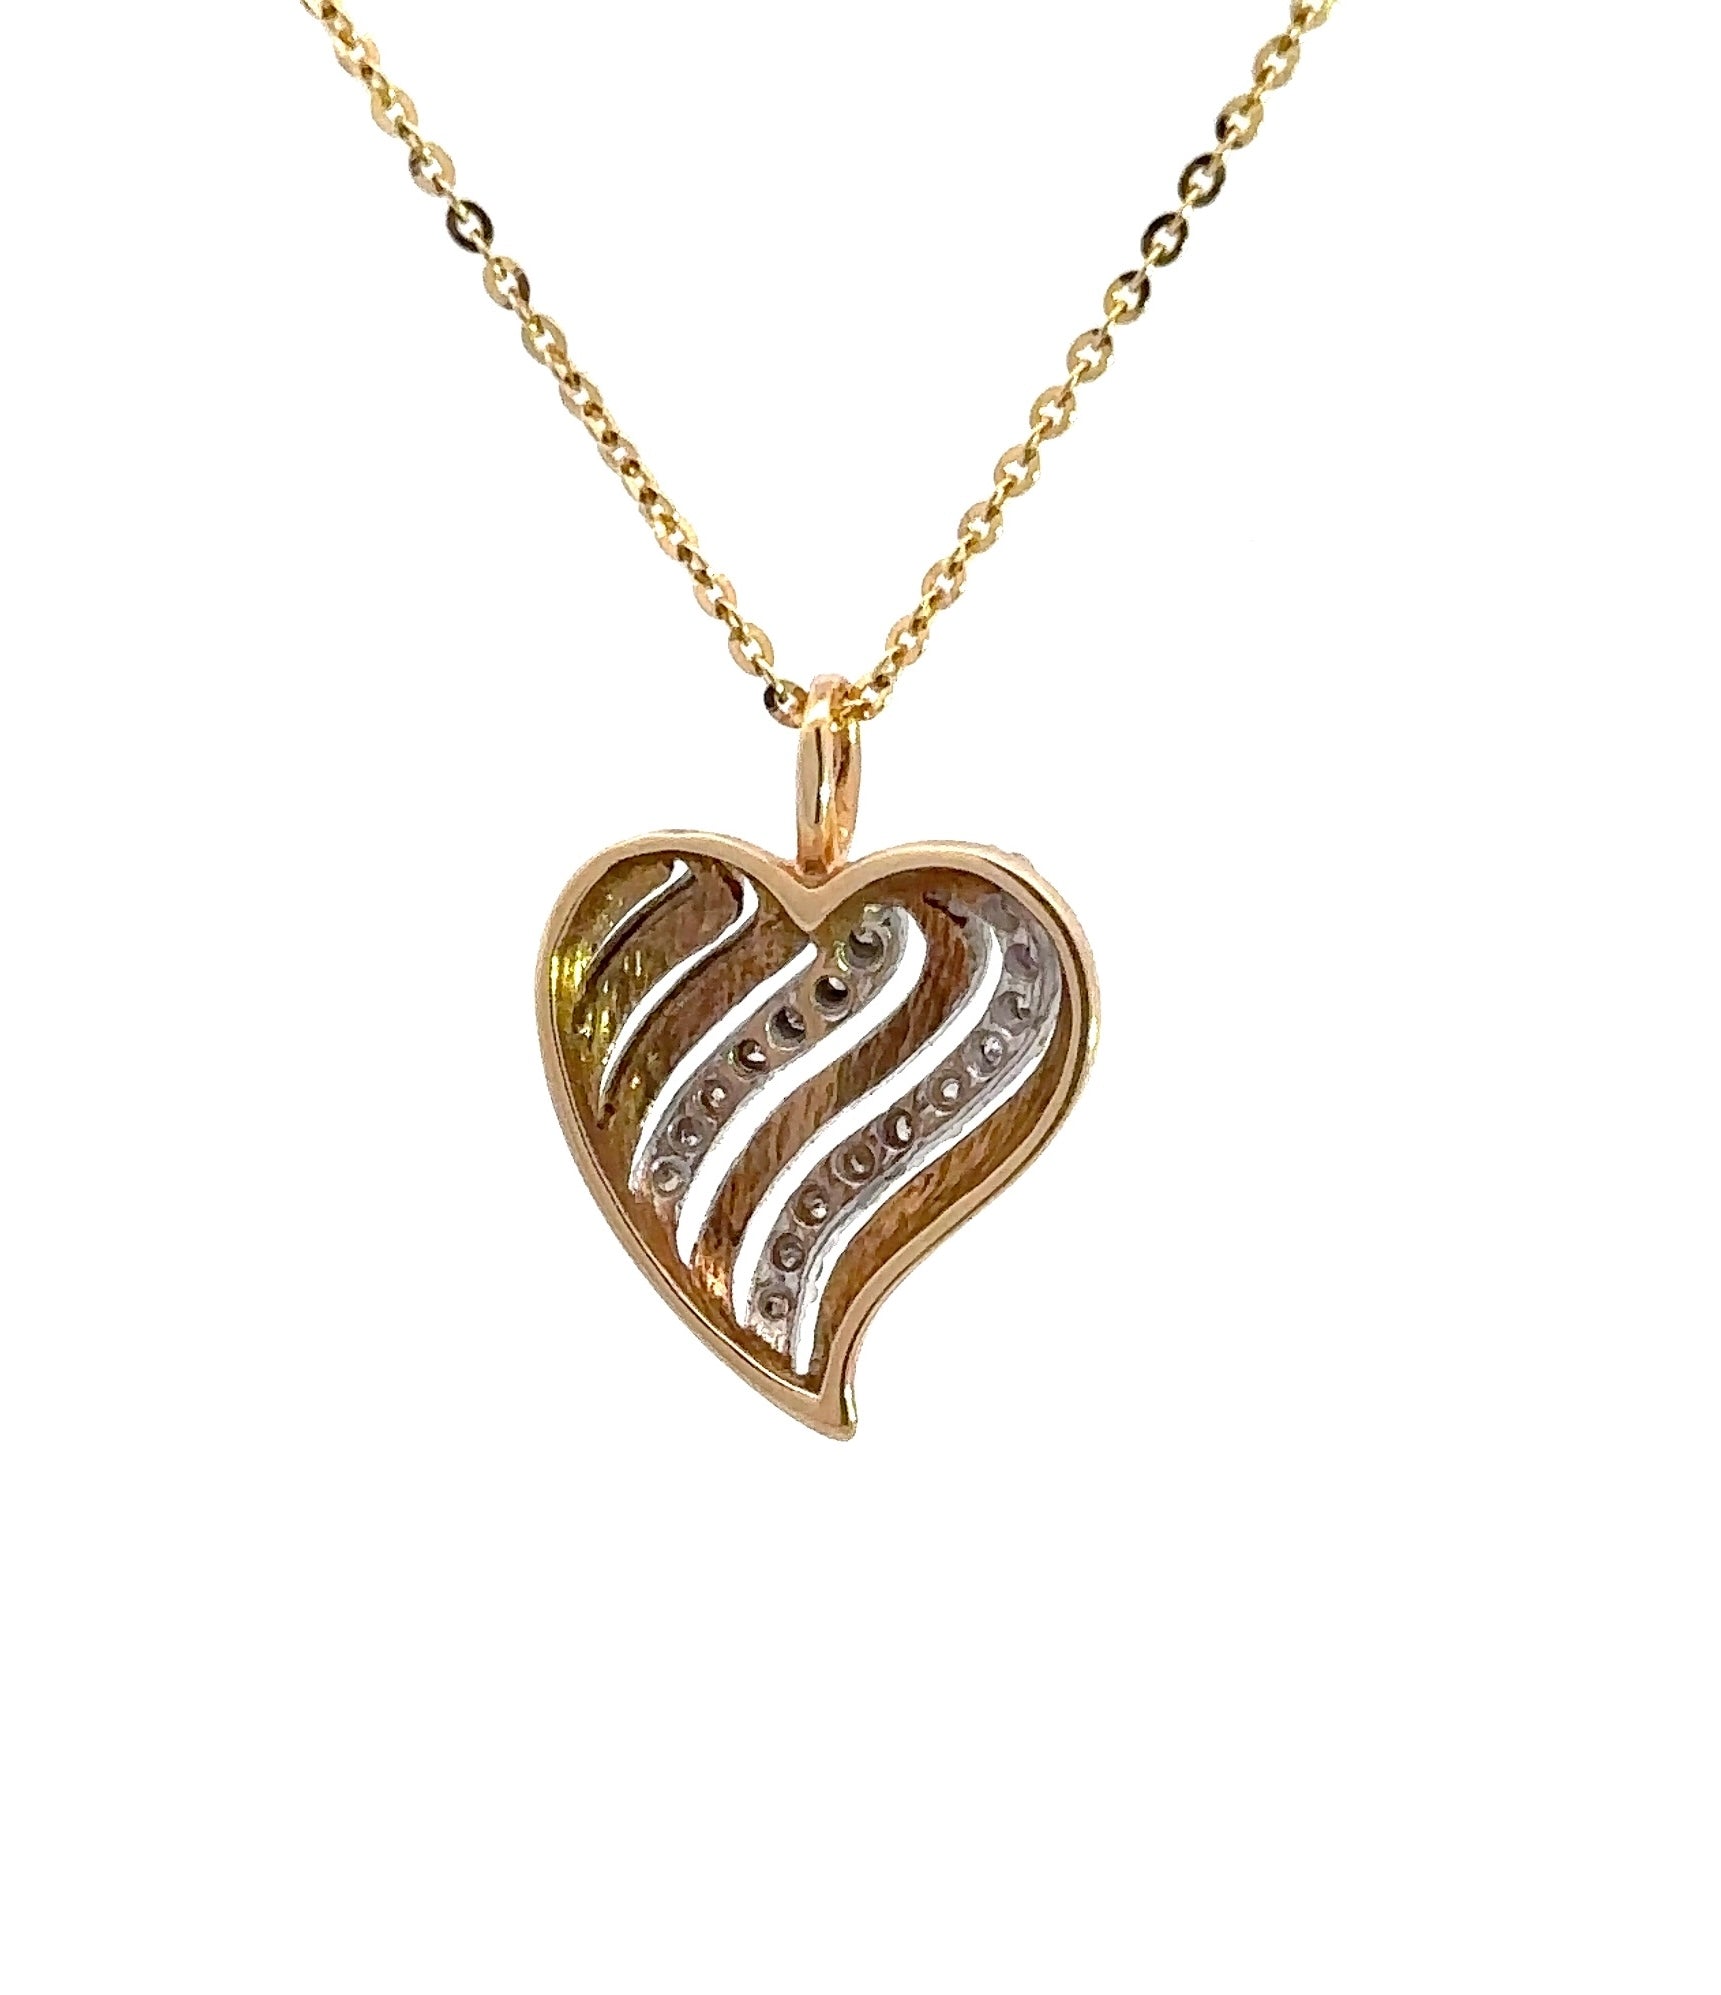 back of heart necklace with open back